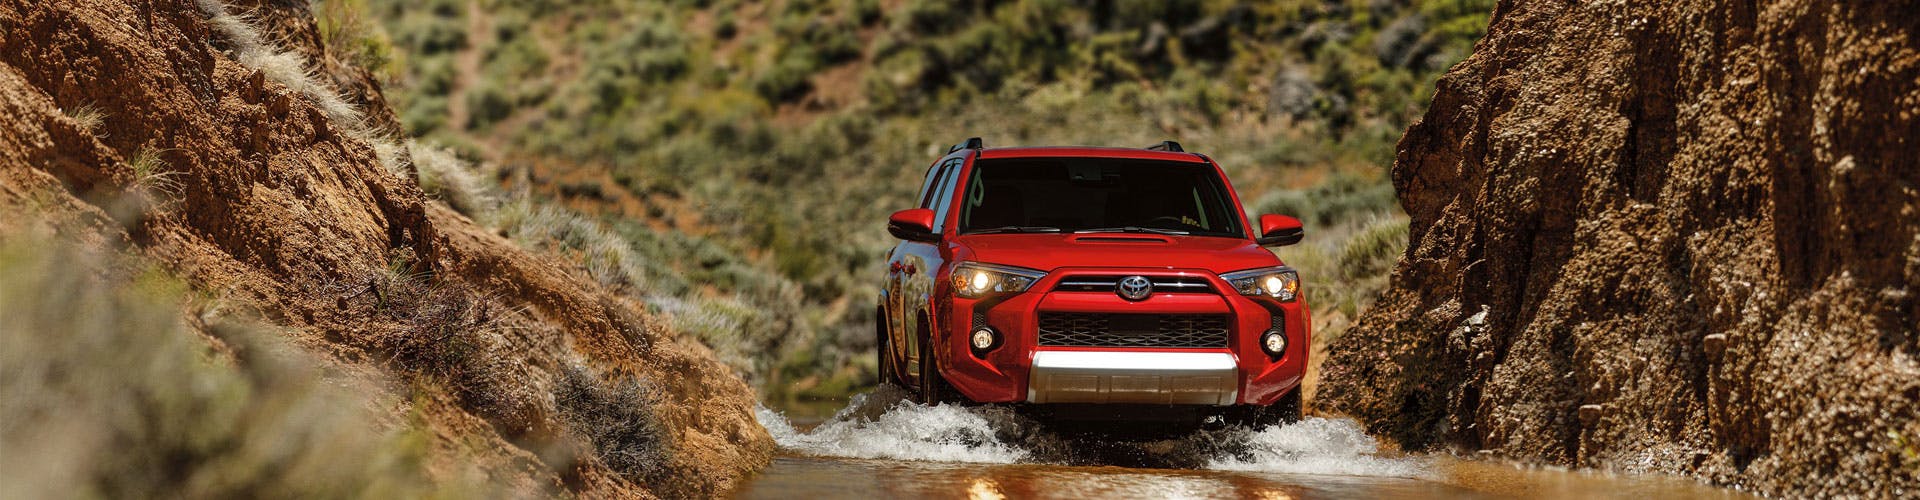 Red 4 Runner offroad